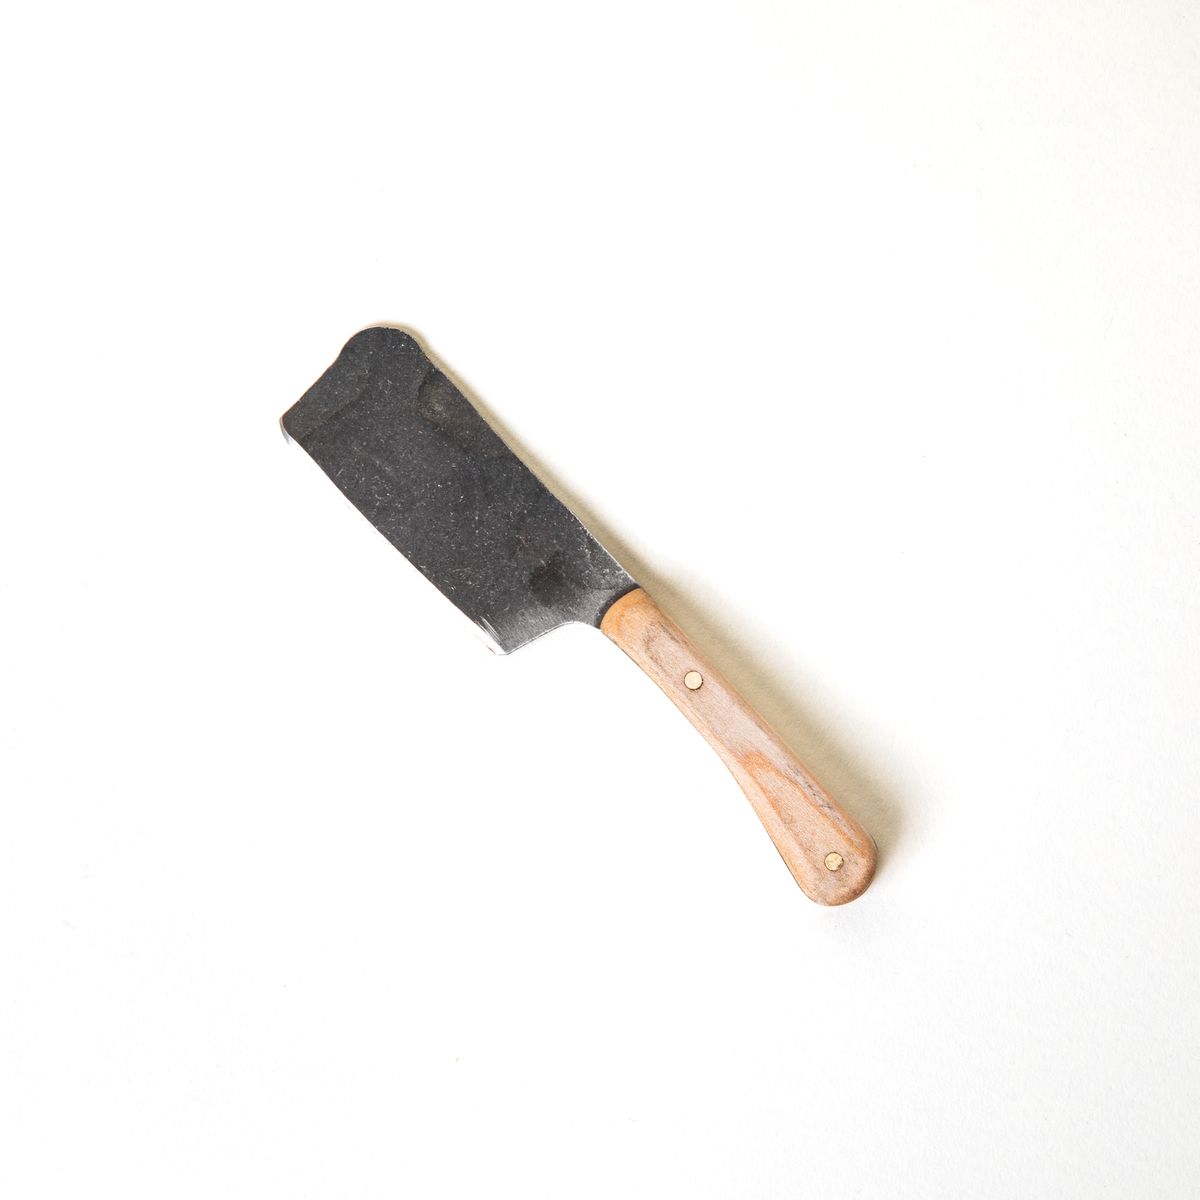 A hand-forged cheese knife with a stainless steel rectangular blade and a maple wood handle